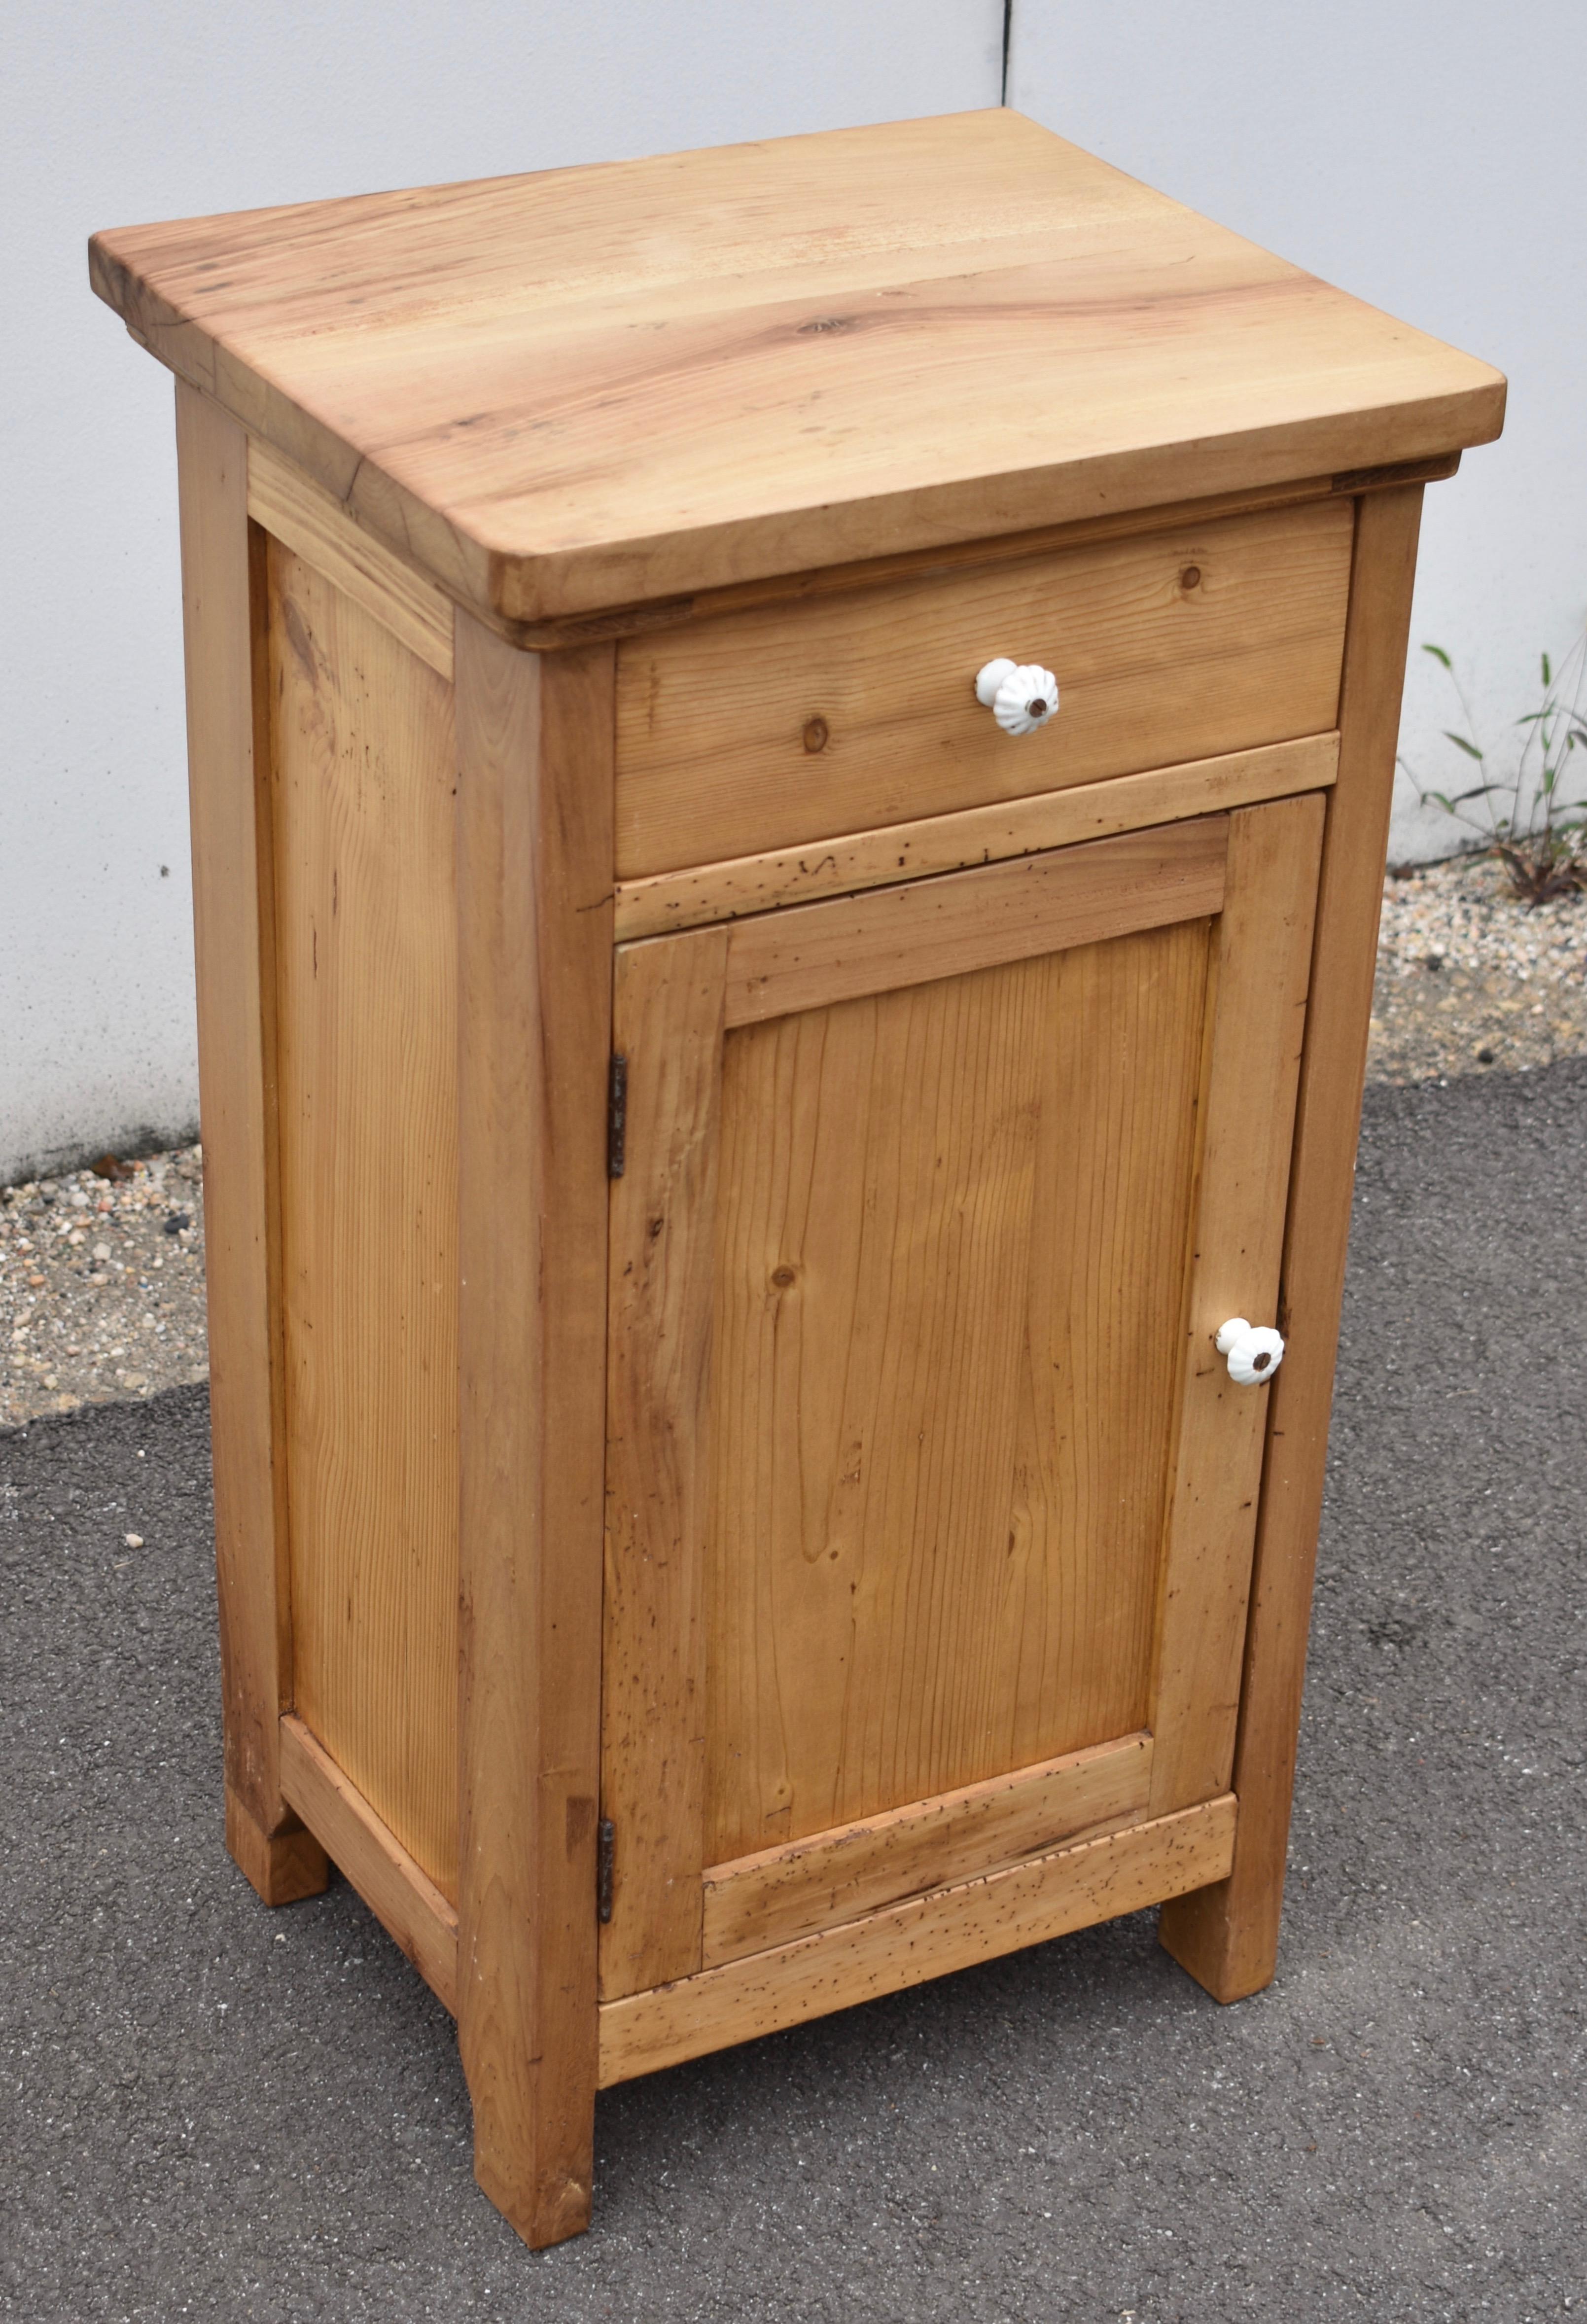 Hungarian Pine and Beech Nightstand with One Door and One Drawer